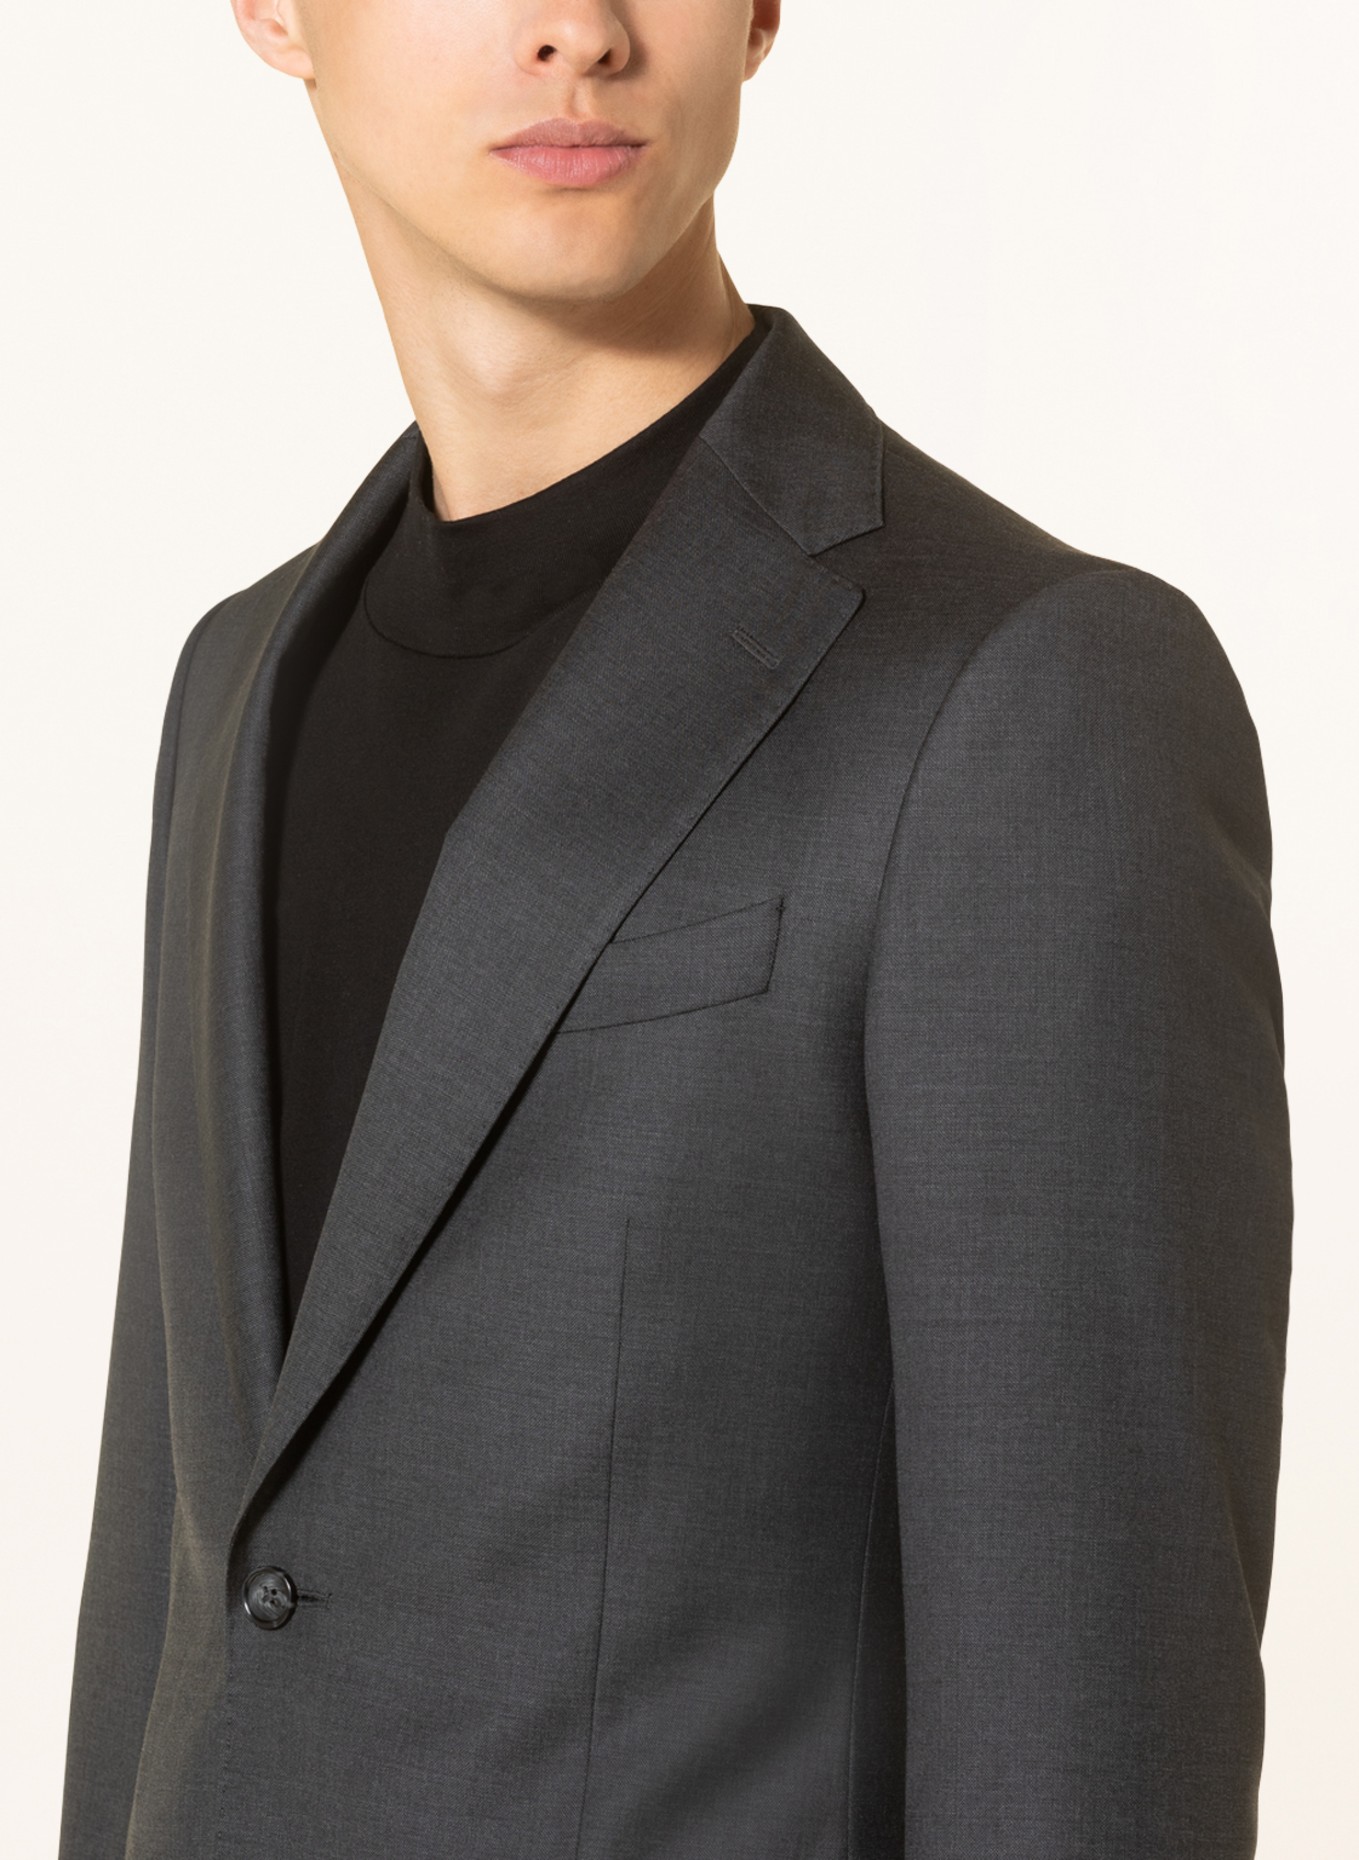 CHAS Suit jacket extra slim fit, Color: 1/1 Anthra (Image 5)